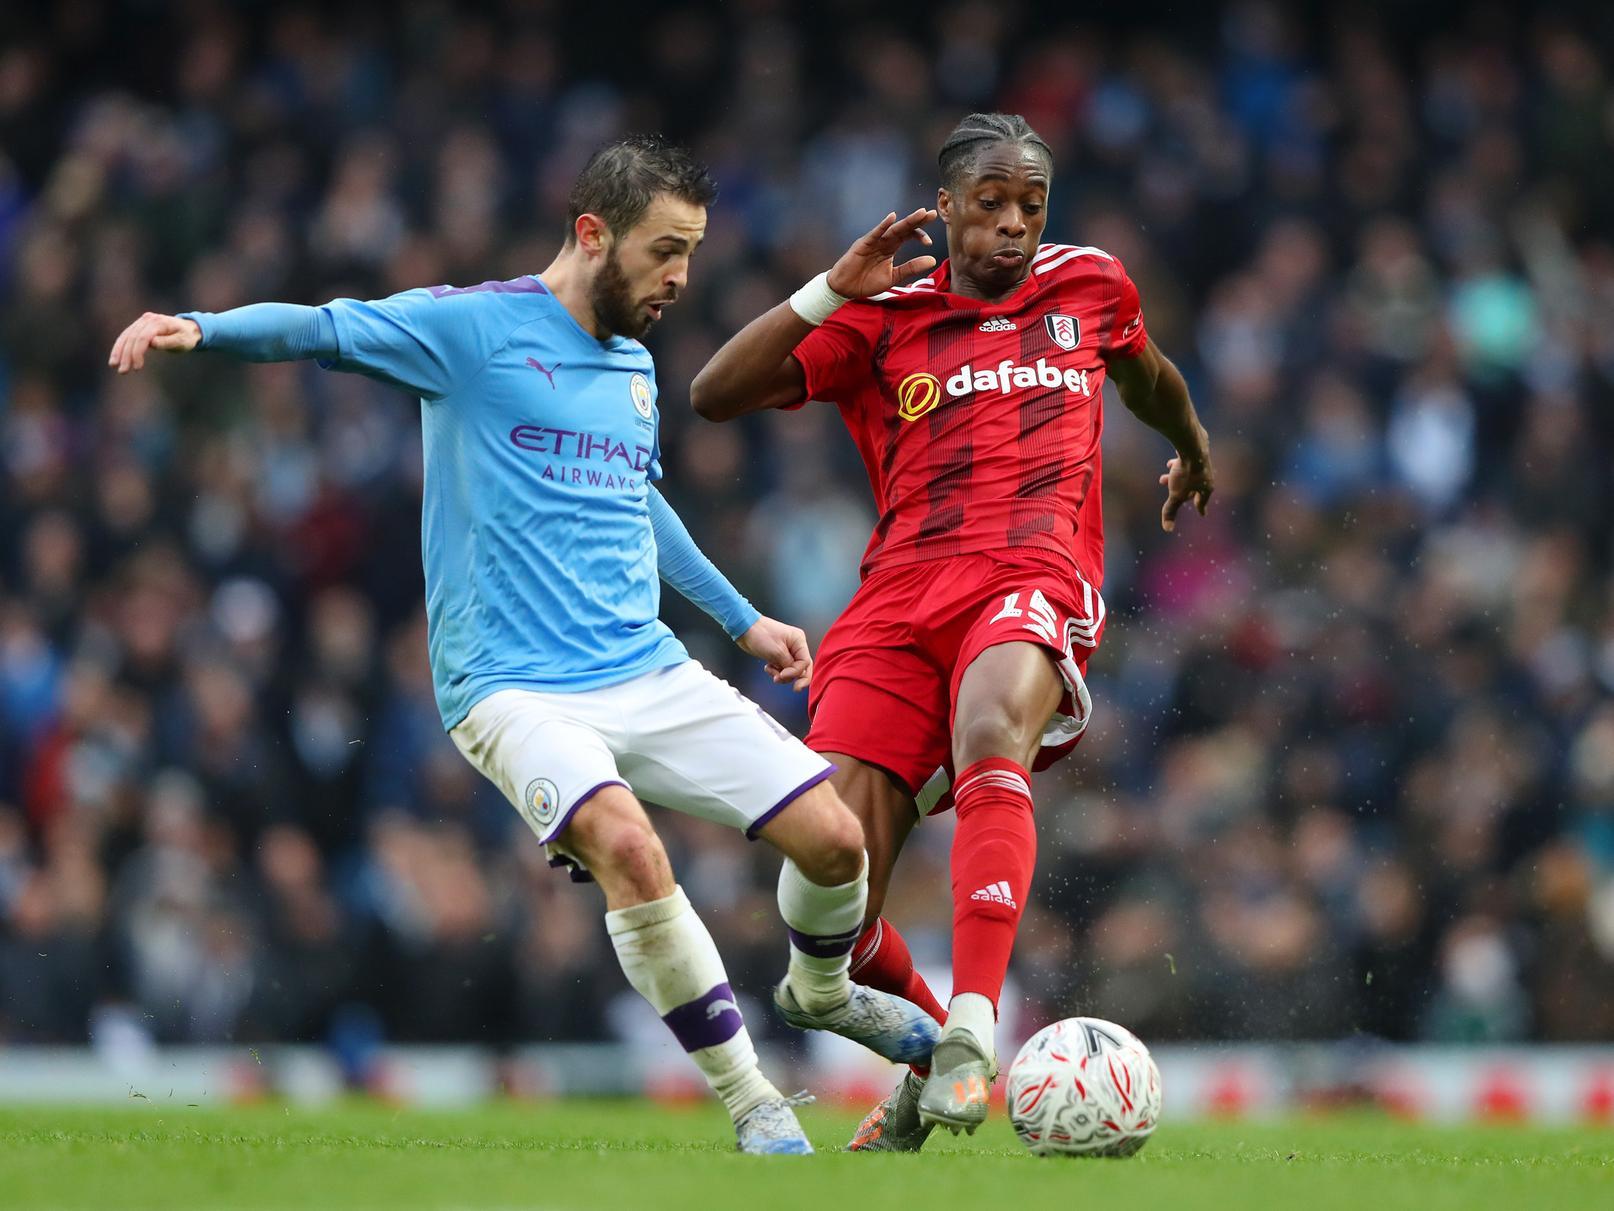 Huddersfield Town defender Terence Kongolo, who has been out on loan with Fulham, has been officially ruled of action for the rest of the season, as he is to undergo surgery for a serious foot injury. (Huddersfield Examiner)